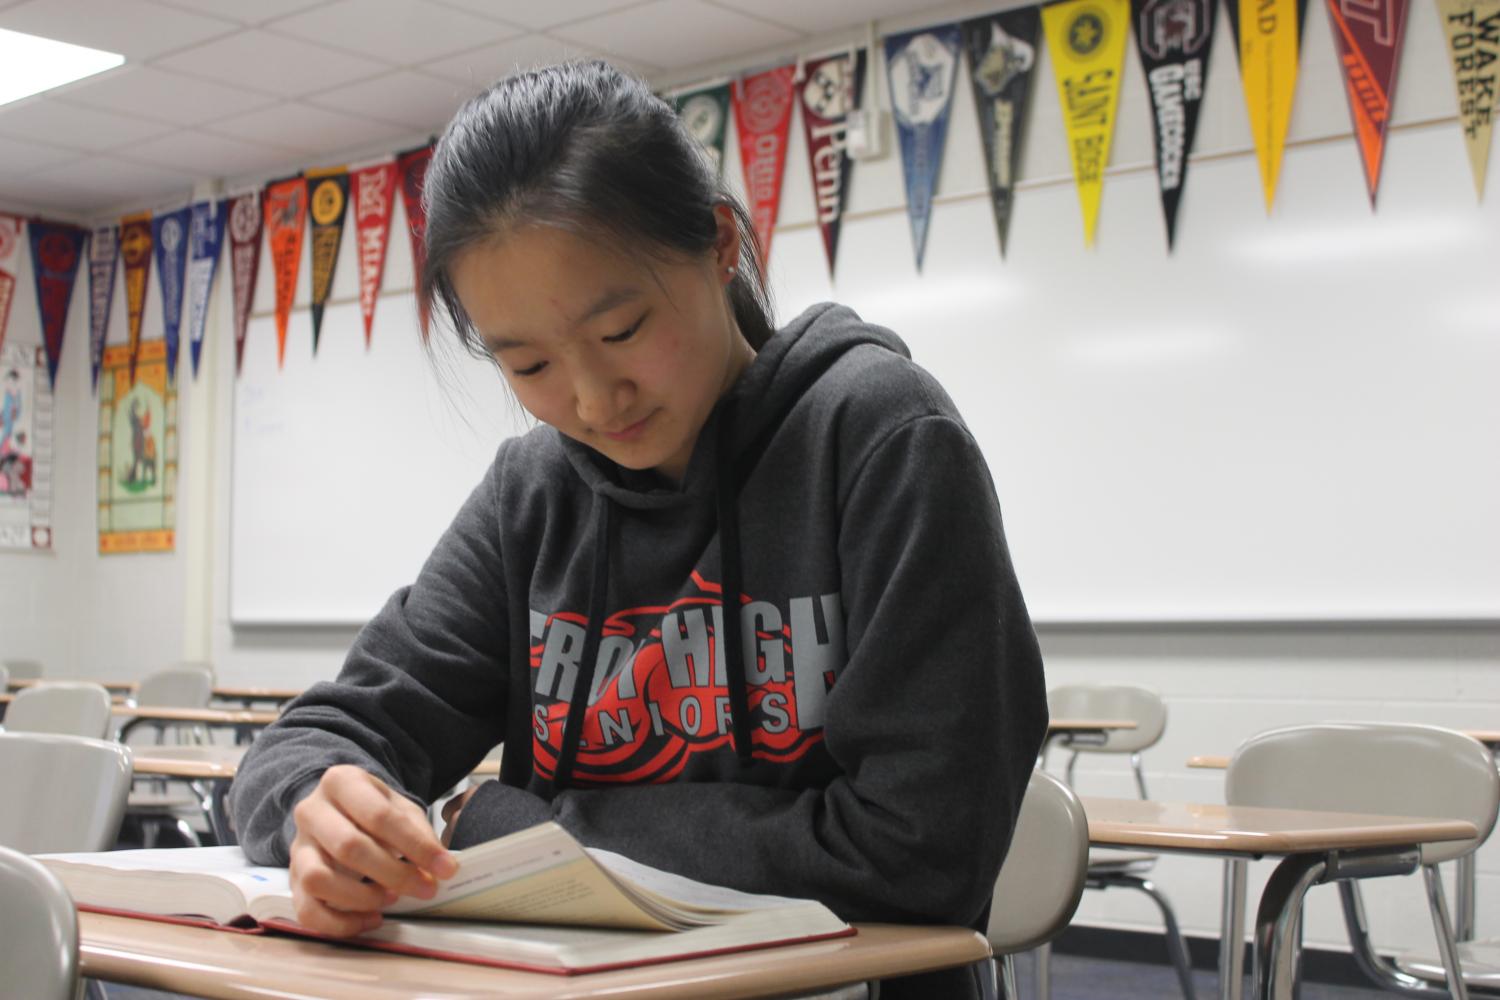 Senior Emily Wang moved to Troy in middle school from China and had to learn English.